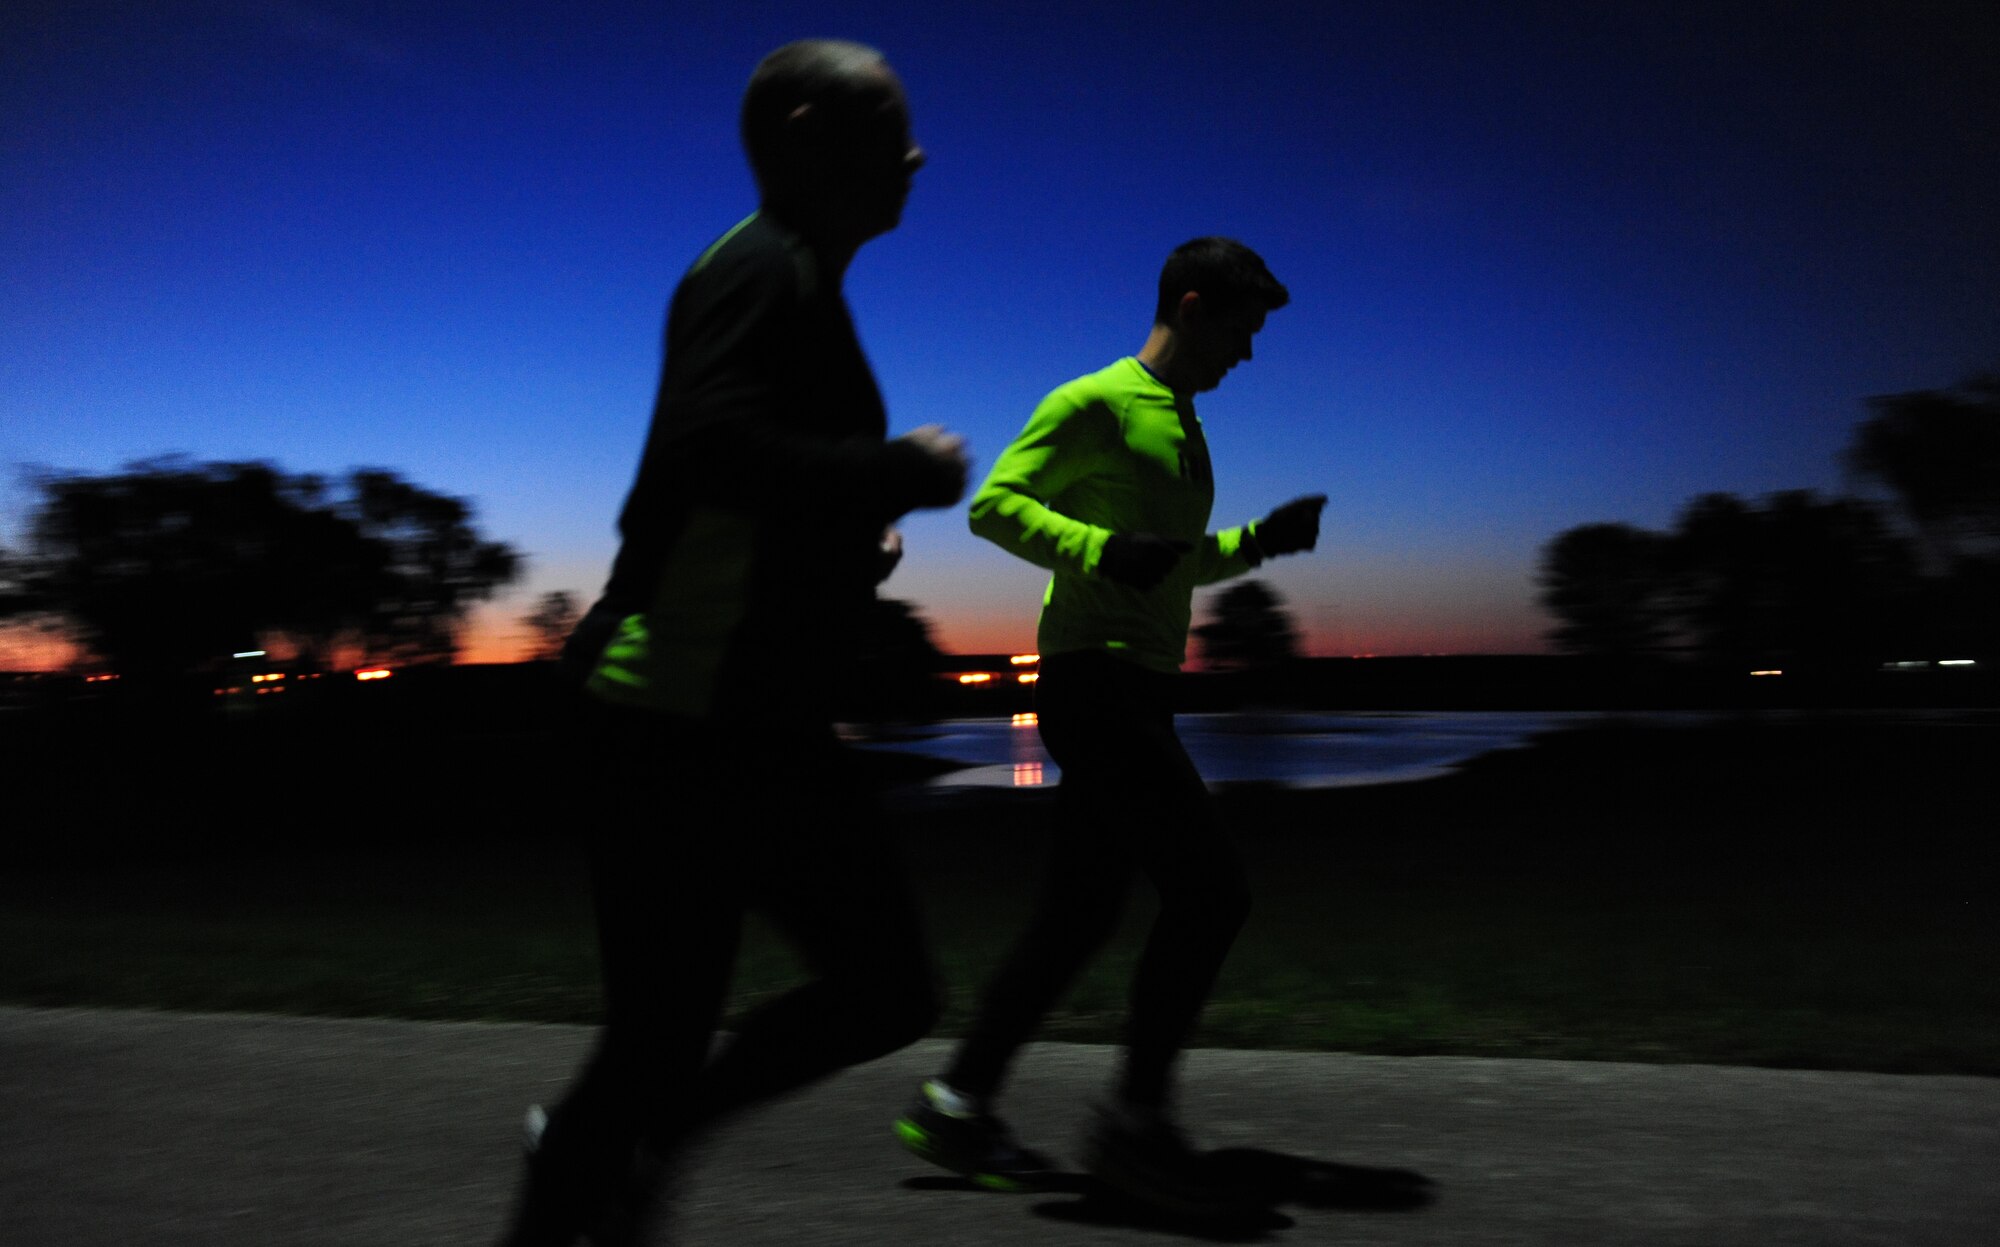 U.S. Air Force Staff Sgt. Brendan Brustad and 1st Lt. James Laughridge, both from the 509th Medical Support Squadron, run during the early hours of the day at Whiteman Air Force Base, Mo., May 19, 2015. Brustad ran 161 miles to honor the 161 victims of an EF5 tornado that happened May 22, 2011, in Joplin, Mo. (U.S. Air Force photo by Senior Airman Joel Pfiester/Released)